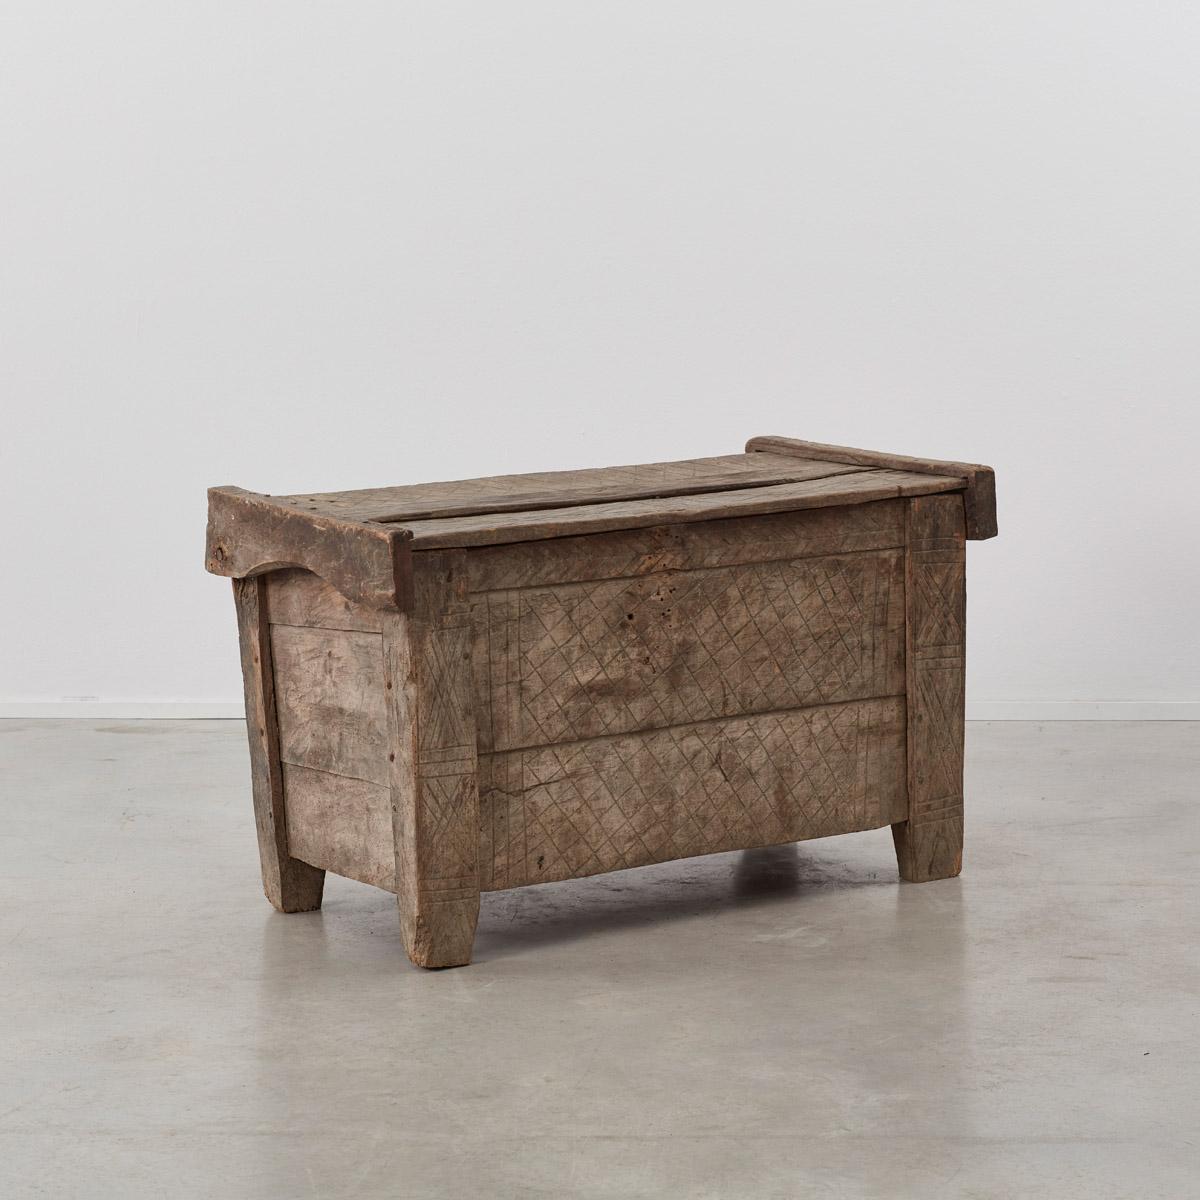 This is an excellent example of a naive hand carved shepherd’s coffer or trunk made in Transylvania in the 1700s. Constructed from hewn timbers naturally bleached to the color of stone. The mesh pattern carved across its surfaces is meant to deter